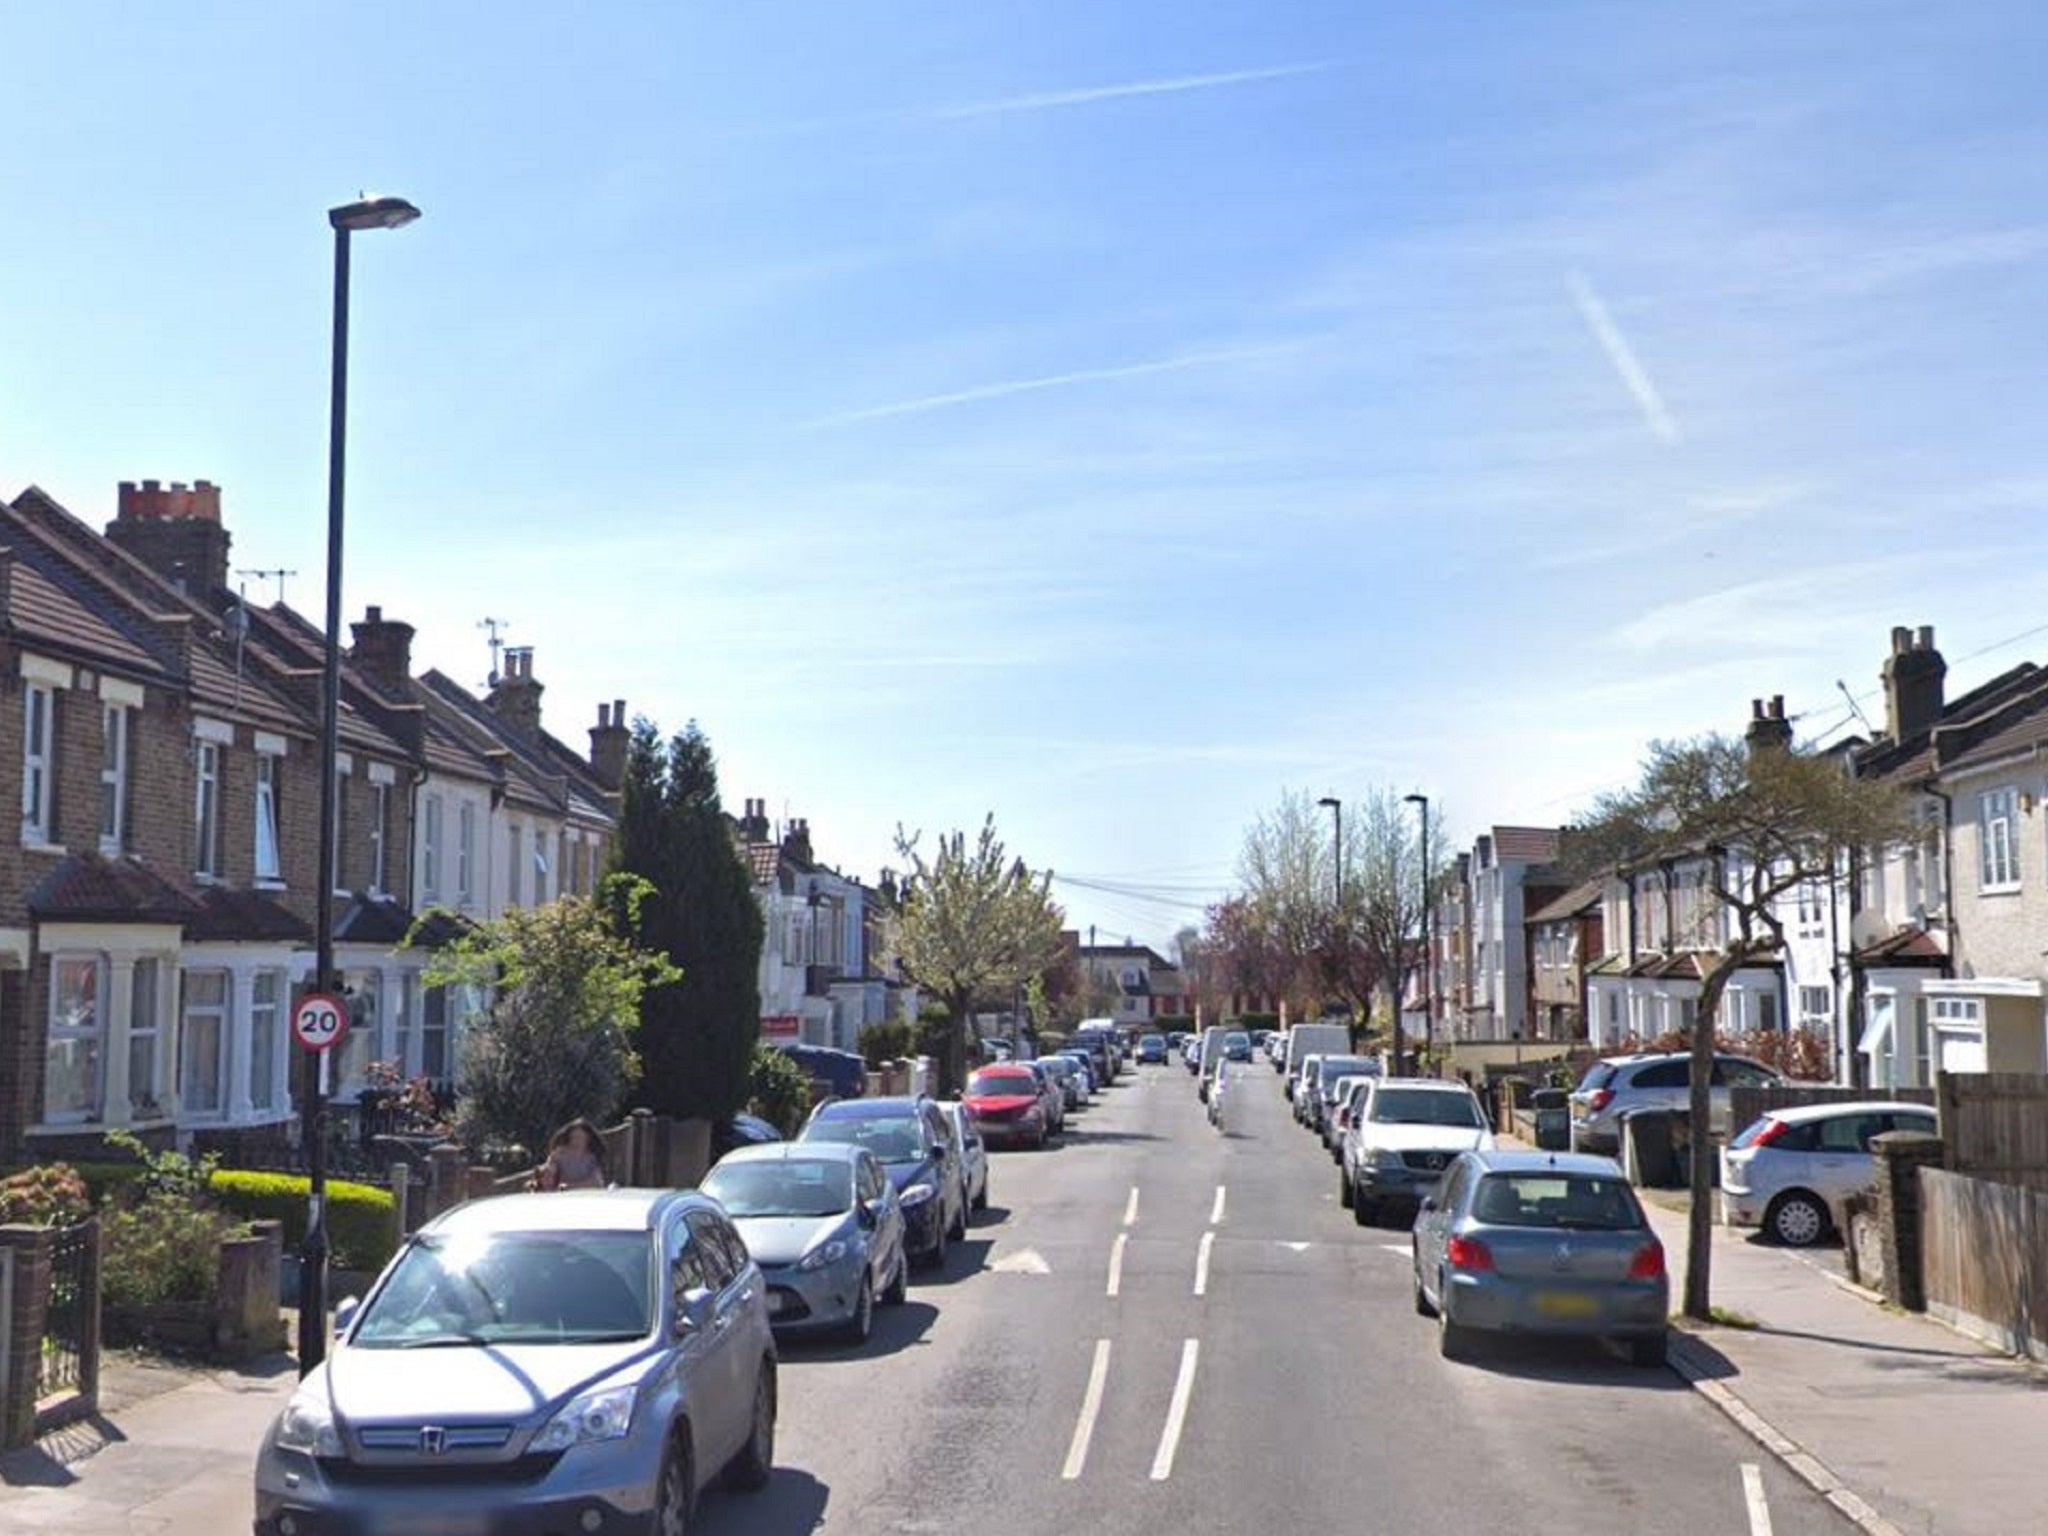 Moffat Road in Croydon, south London, where a schoolgirl was stabbed in the leg by a 15-year-old boy